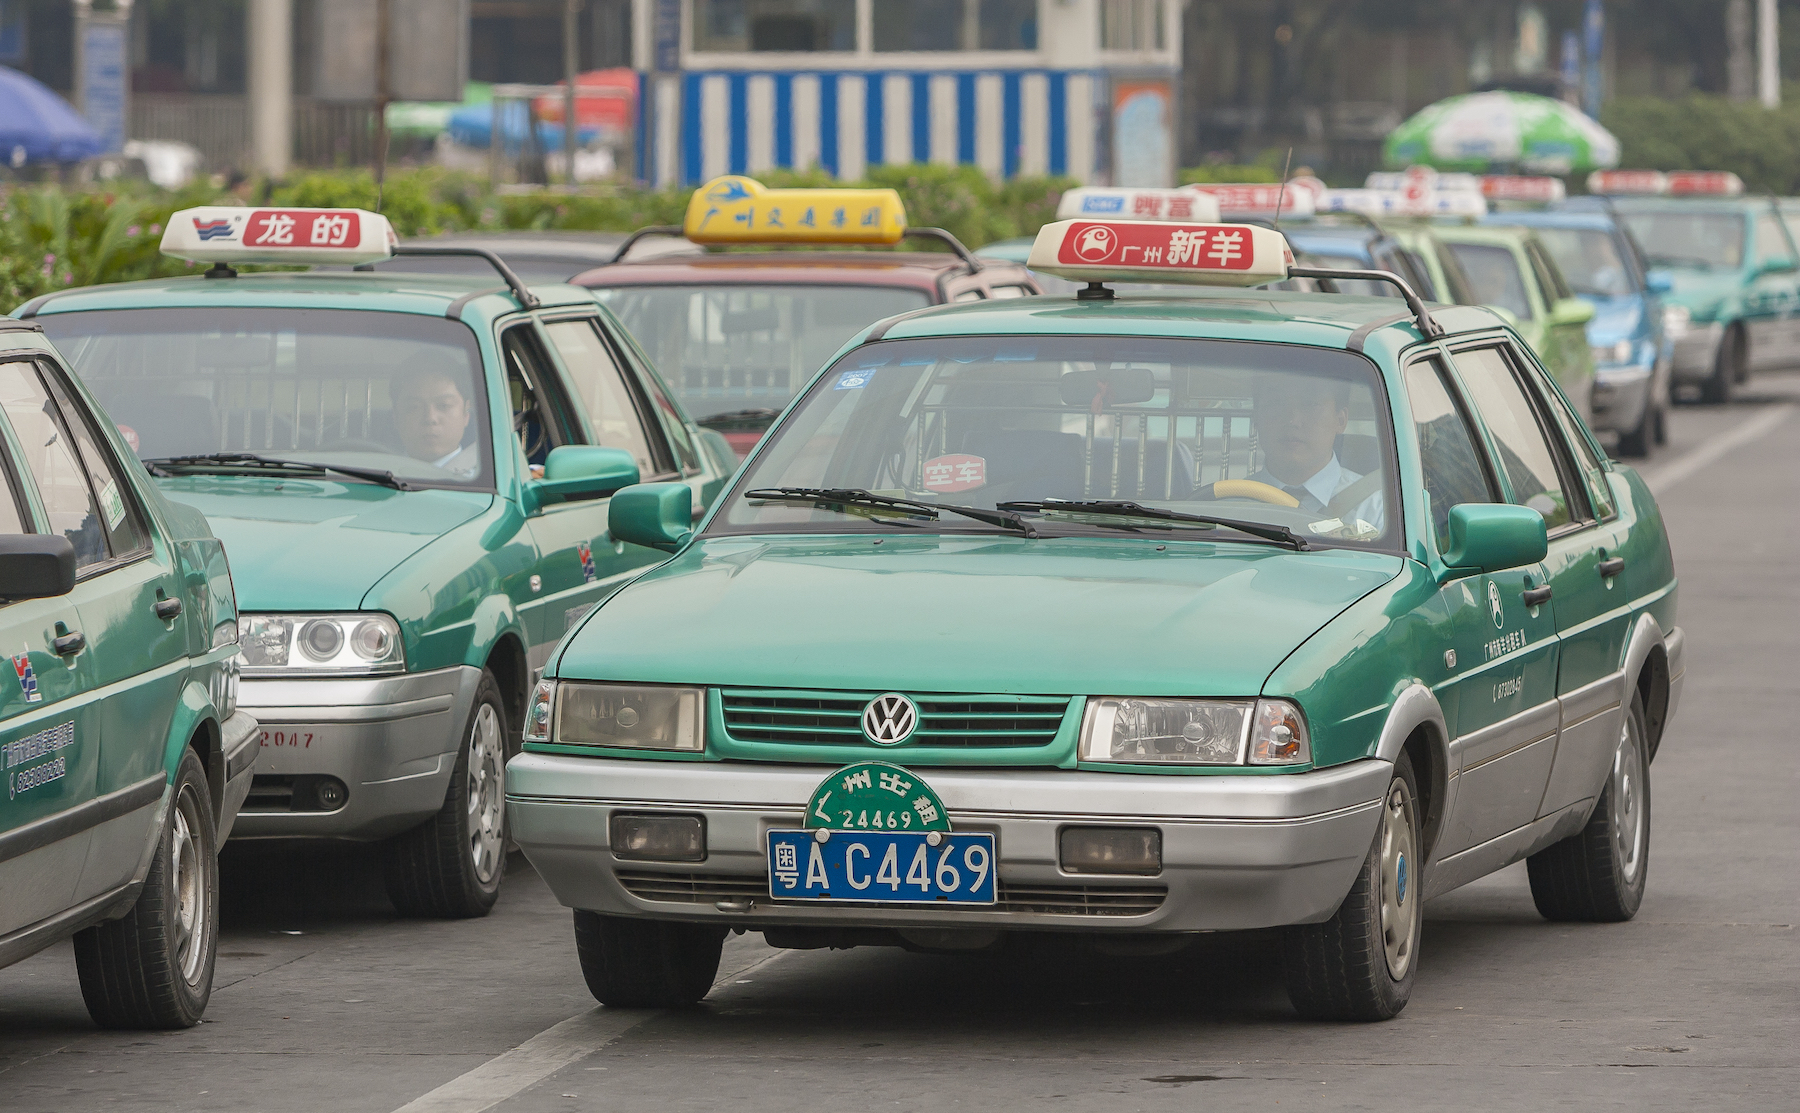 Photograph of taxis in China